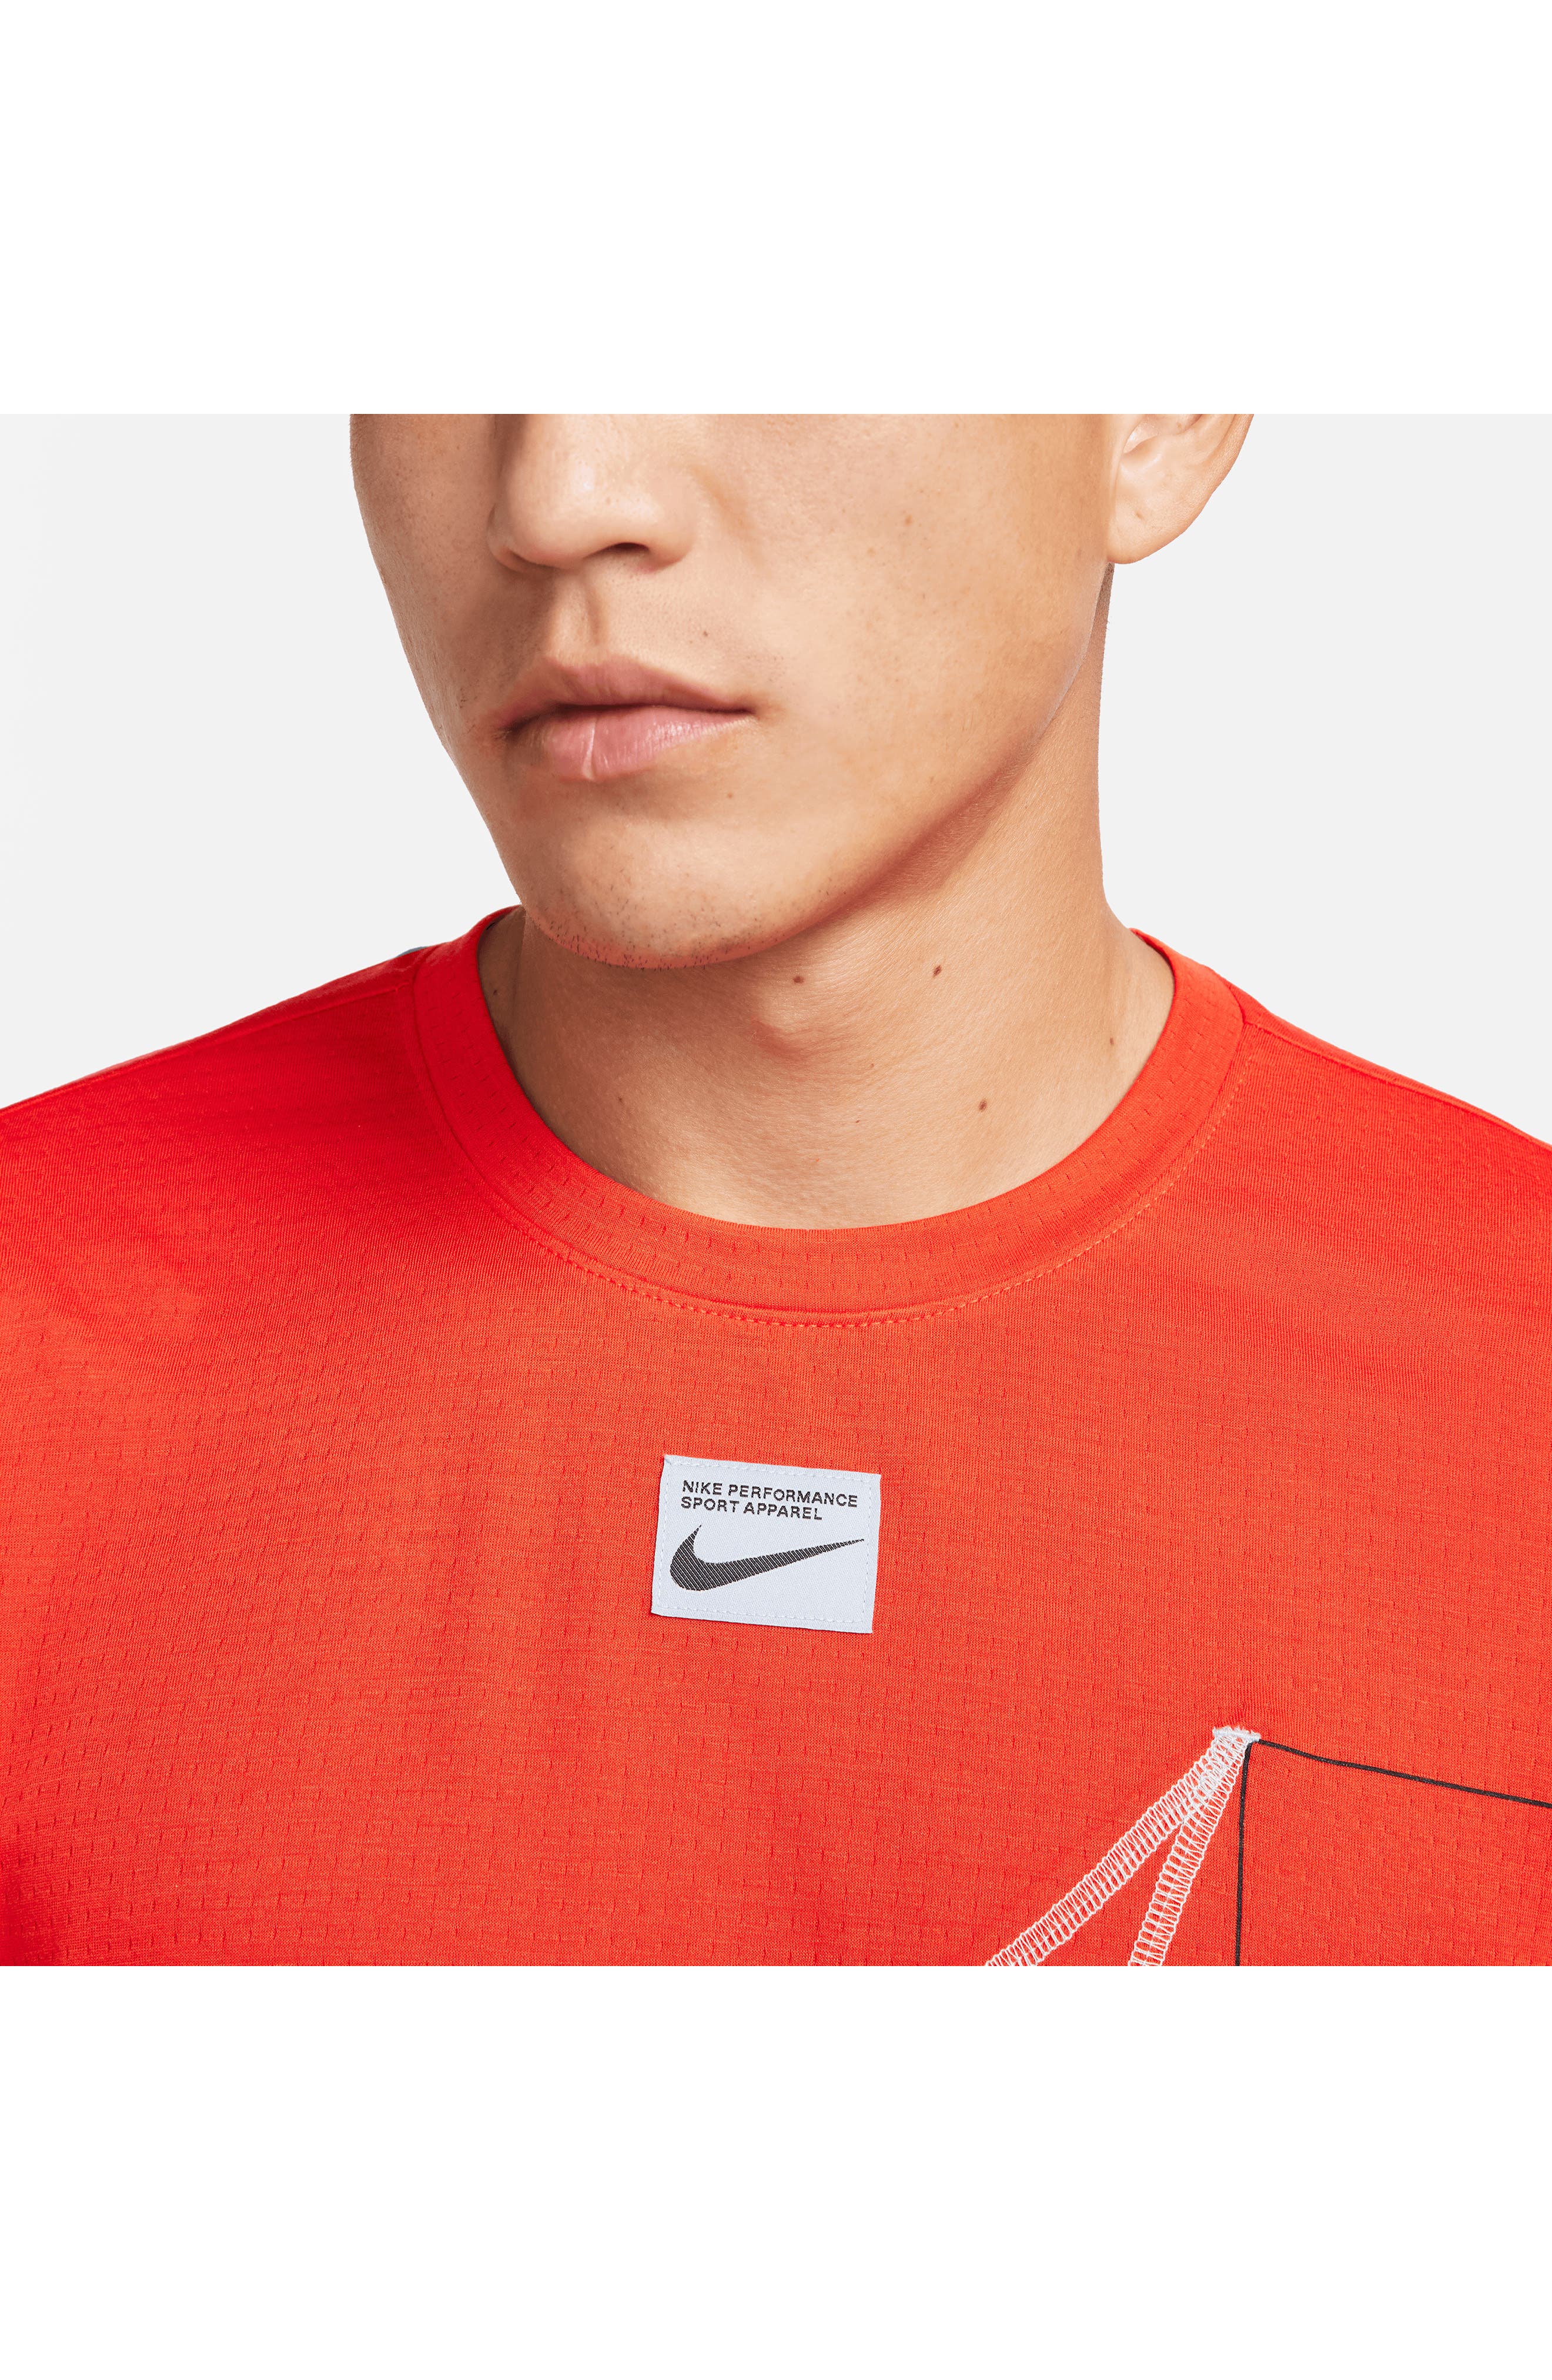 Nike Dri-FIT Q5 Fitness T-Shirt in Picante Red/Blue Whisper | Smart Closet